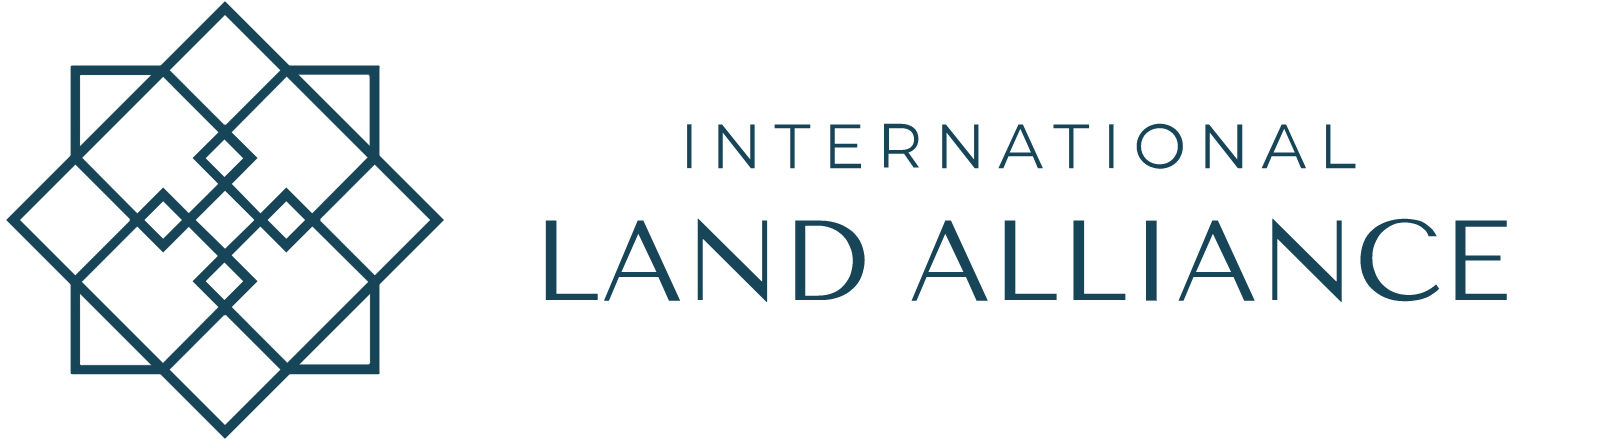 International Land Alliance, Inc. Announces Results of Open House at Valle Divino